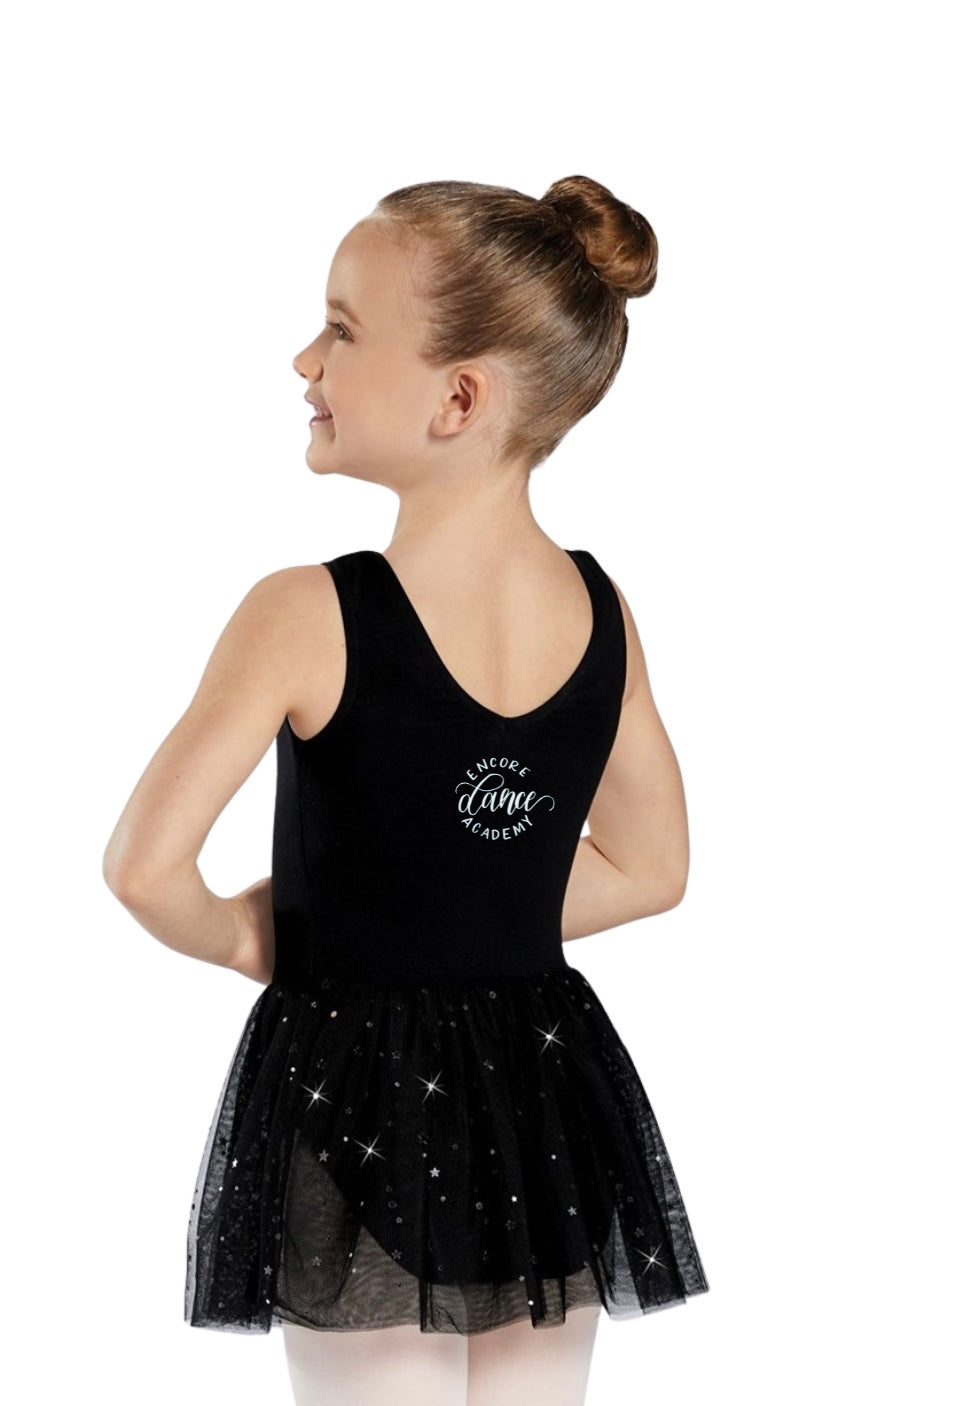 Leotard with Attached Star Skirt